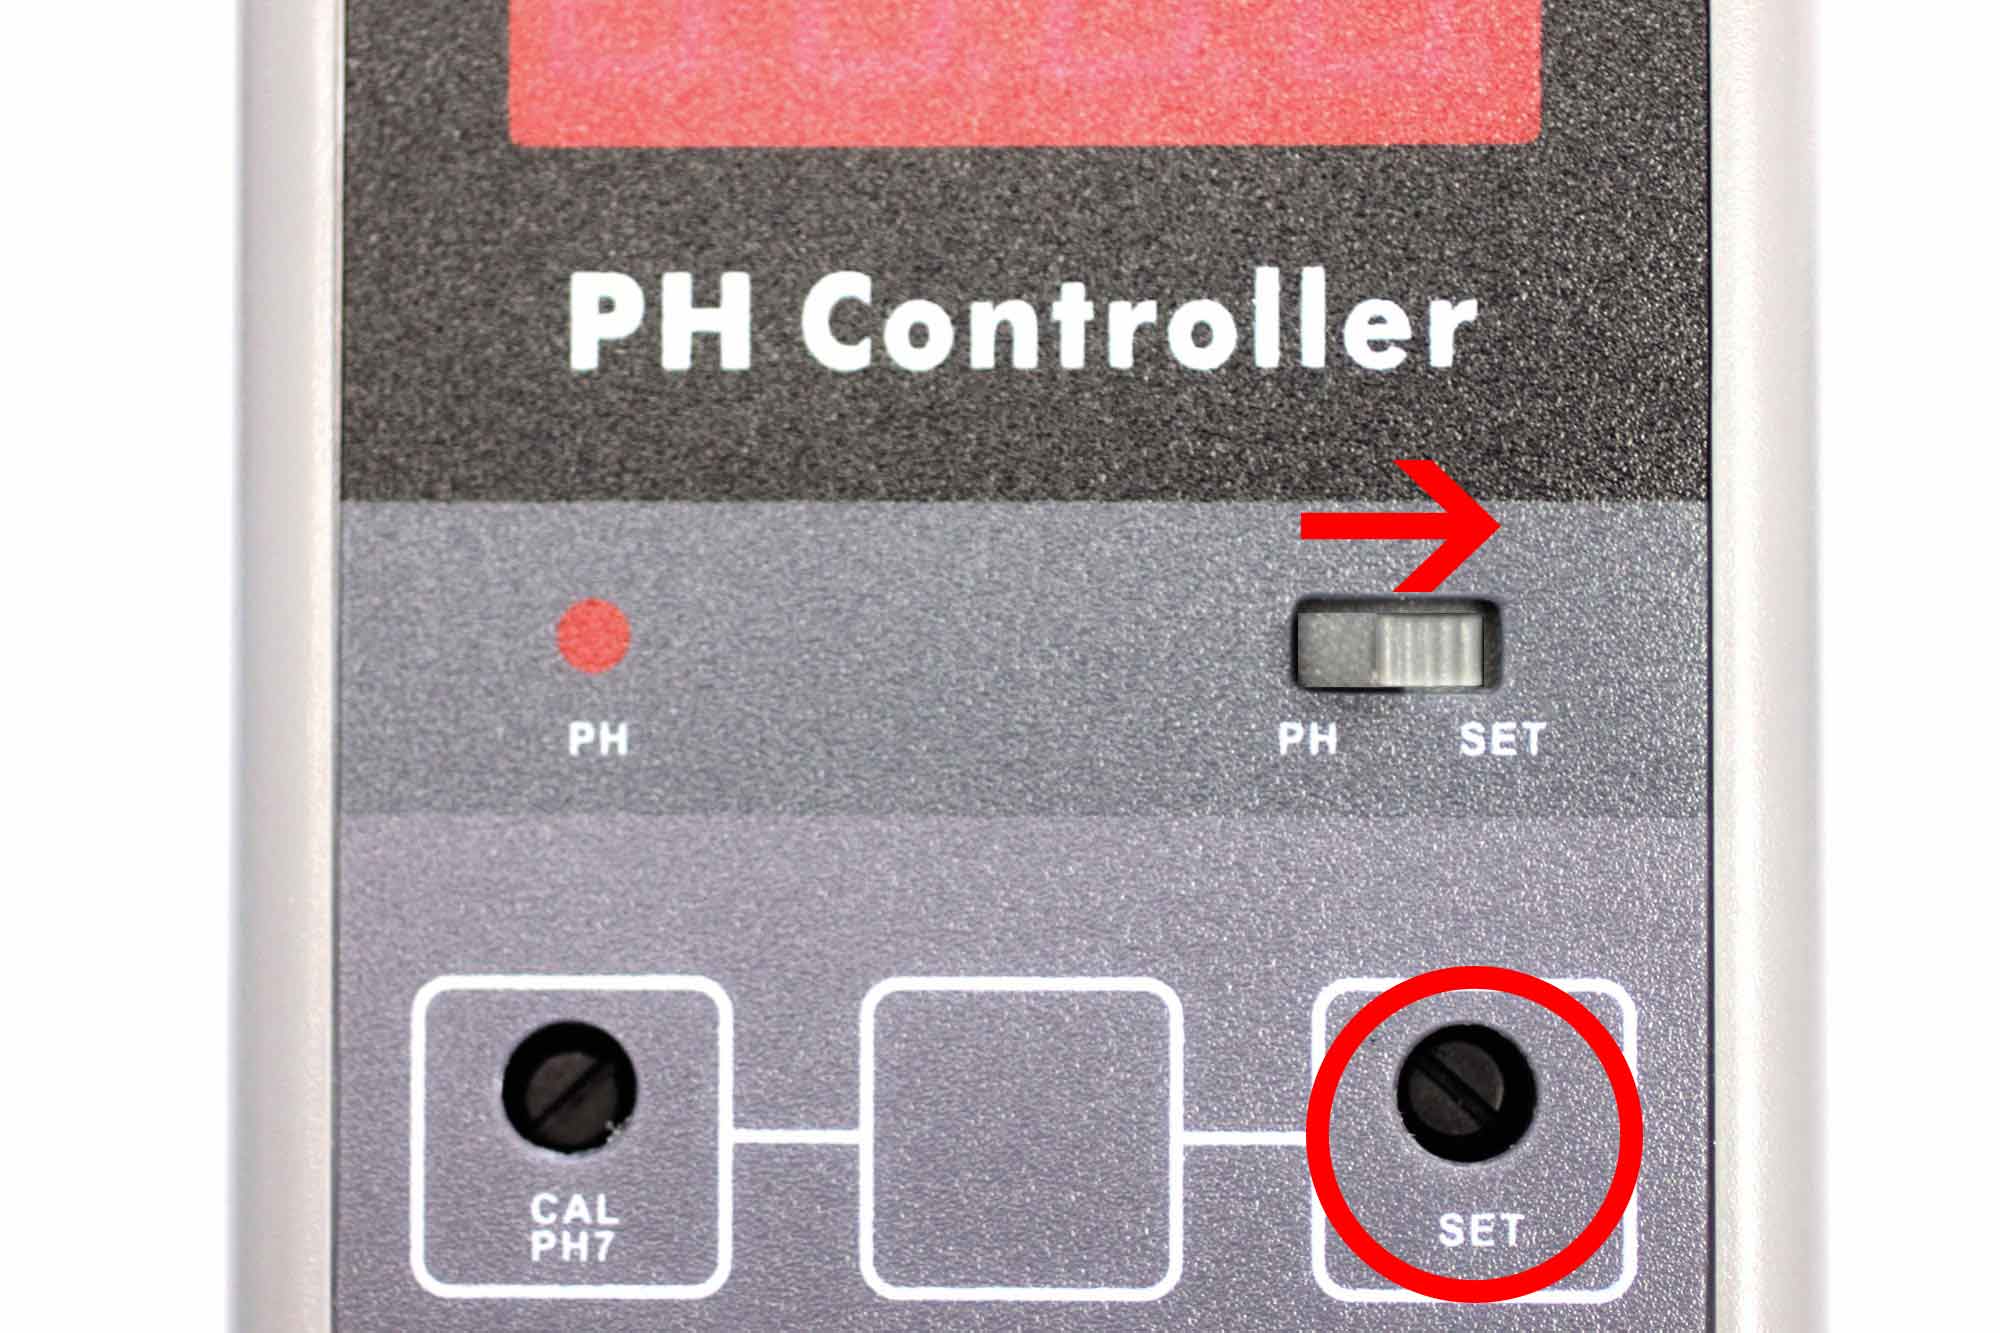 Setting the pH level on the controller